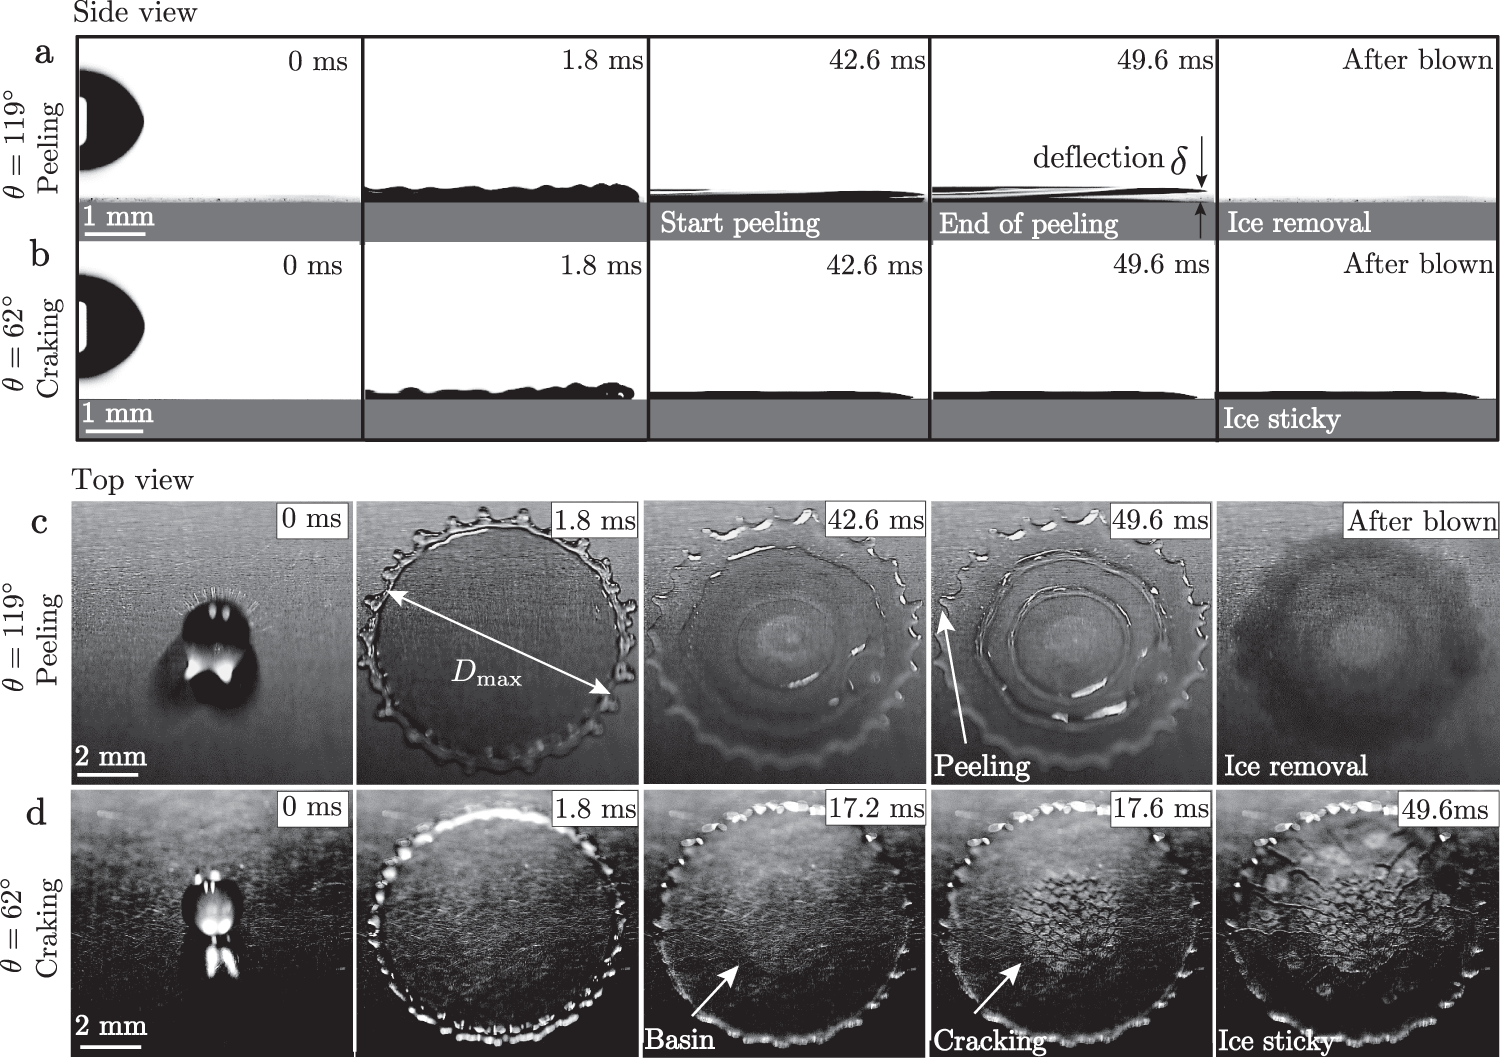 Self-peeling of frozen water droplets upon impacting a cold surface |  Communications Physics